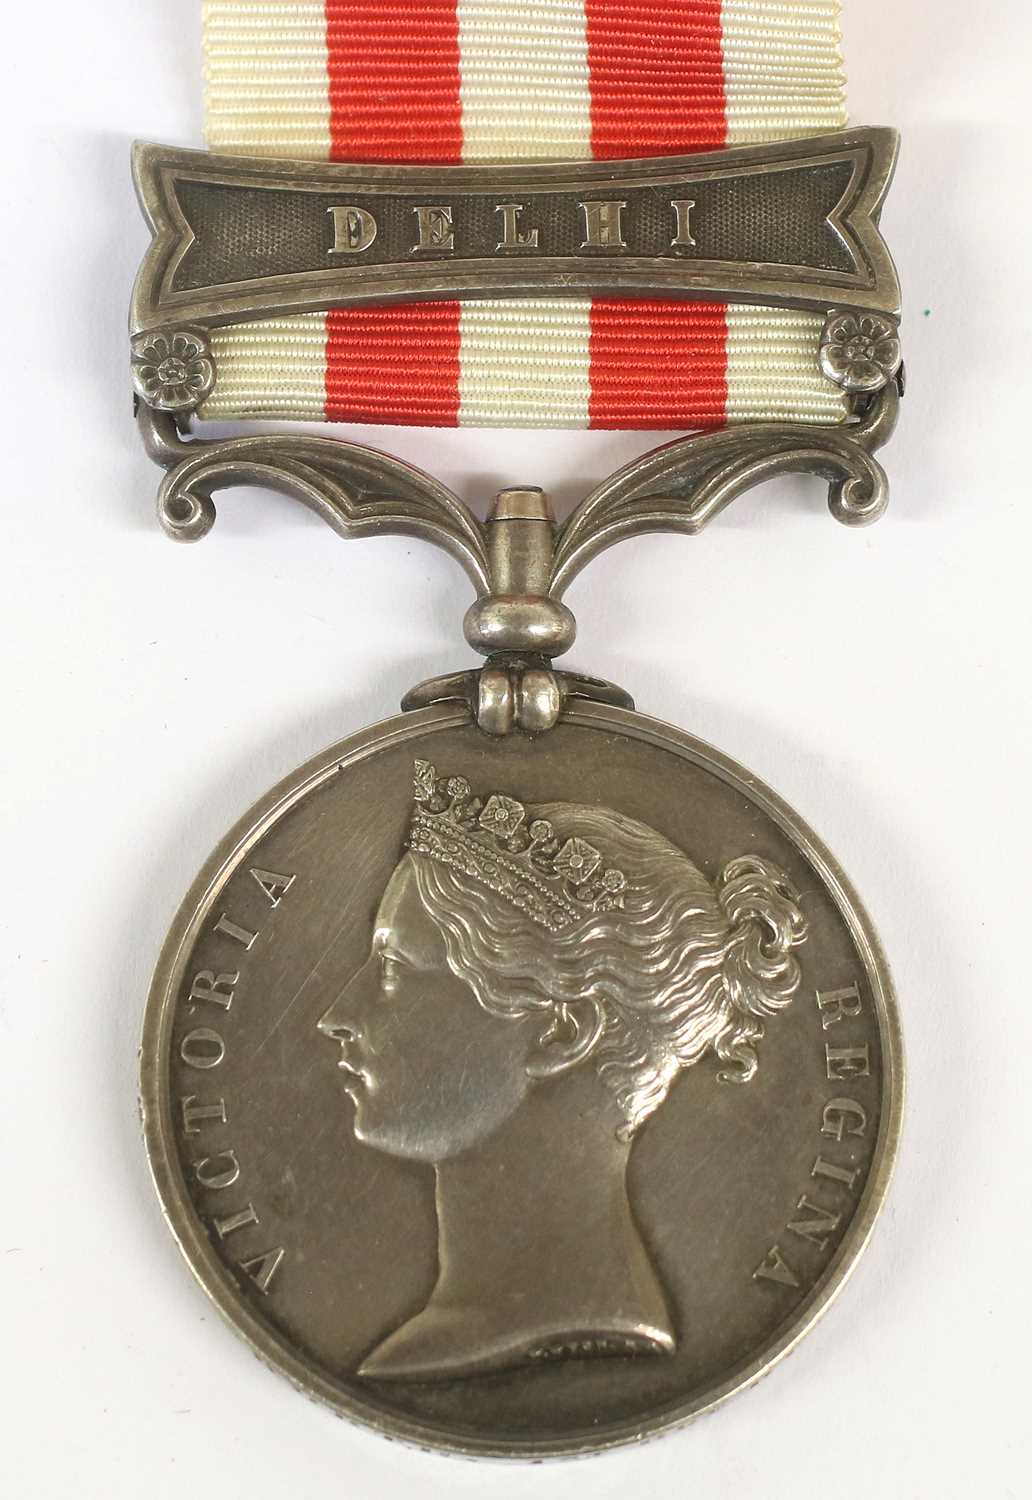 Lot 24 - An Indian Mutiny Medal 1857-59, with clasp...